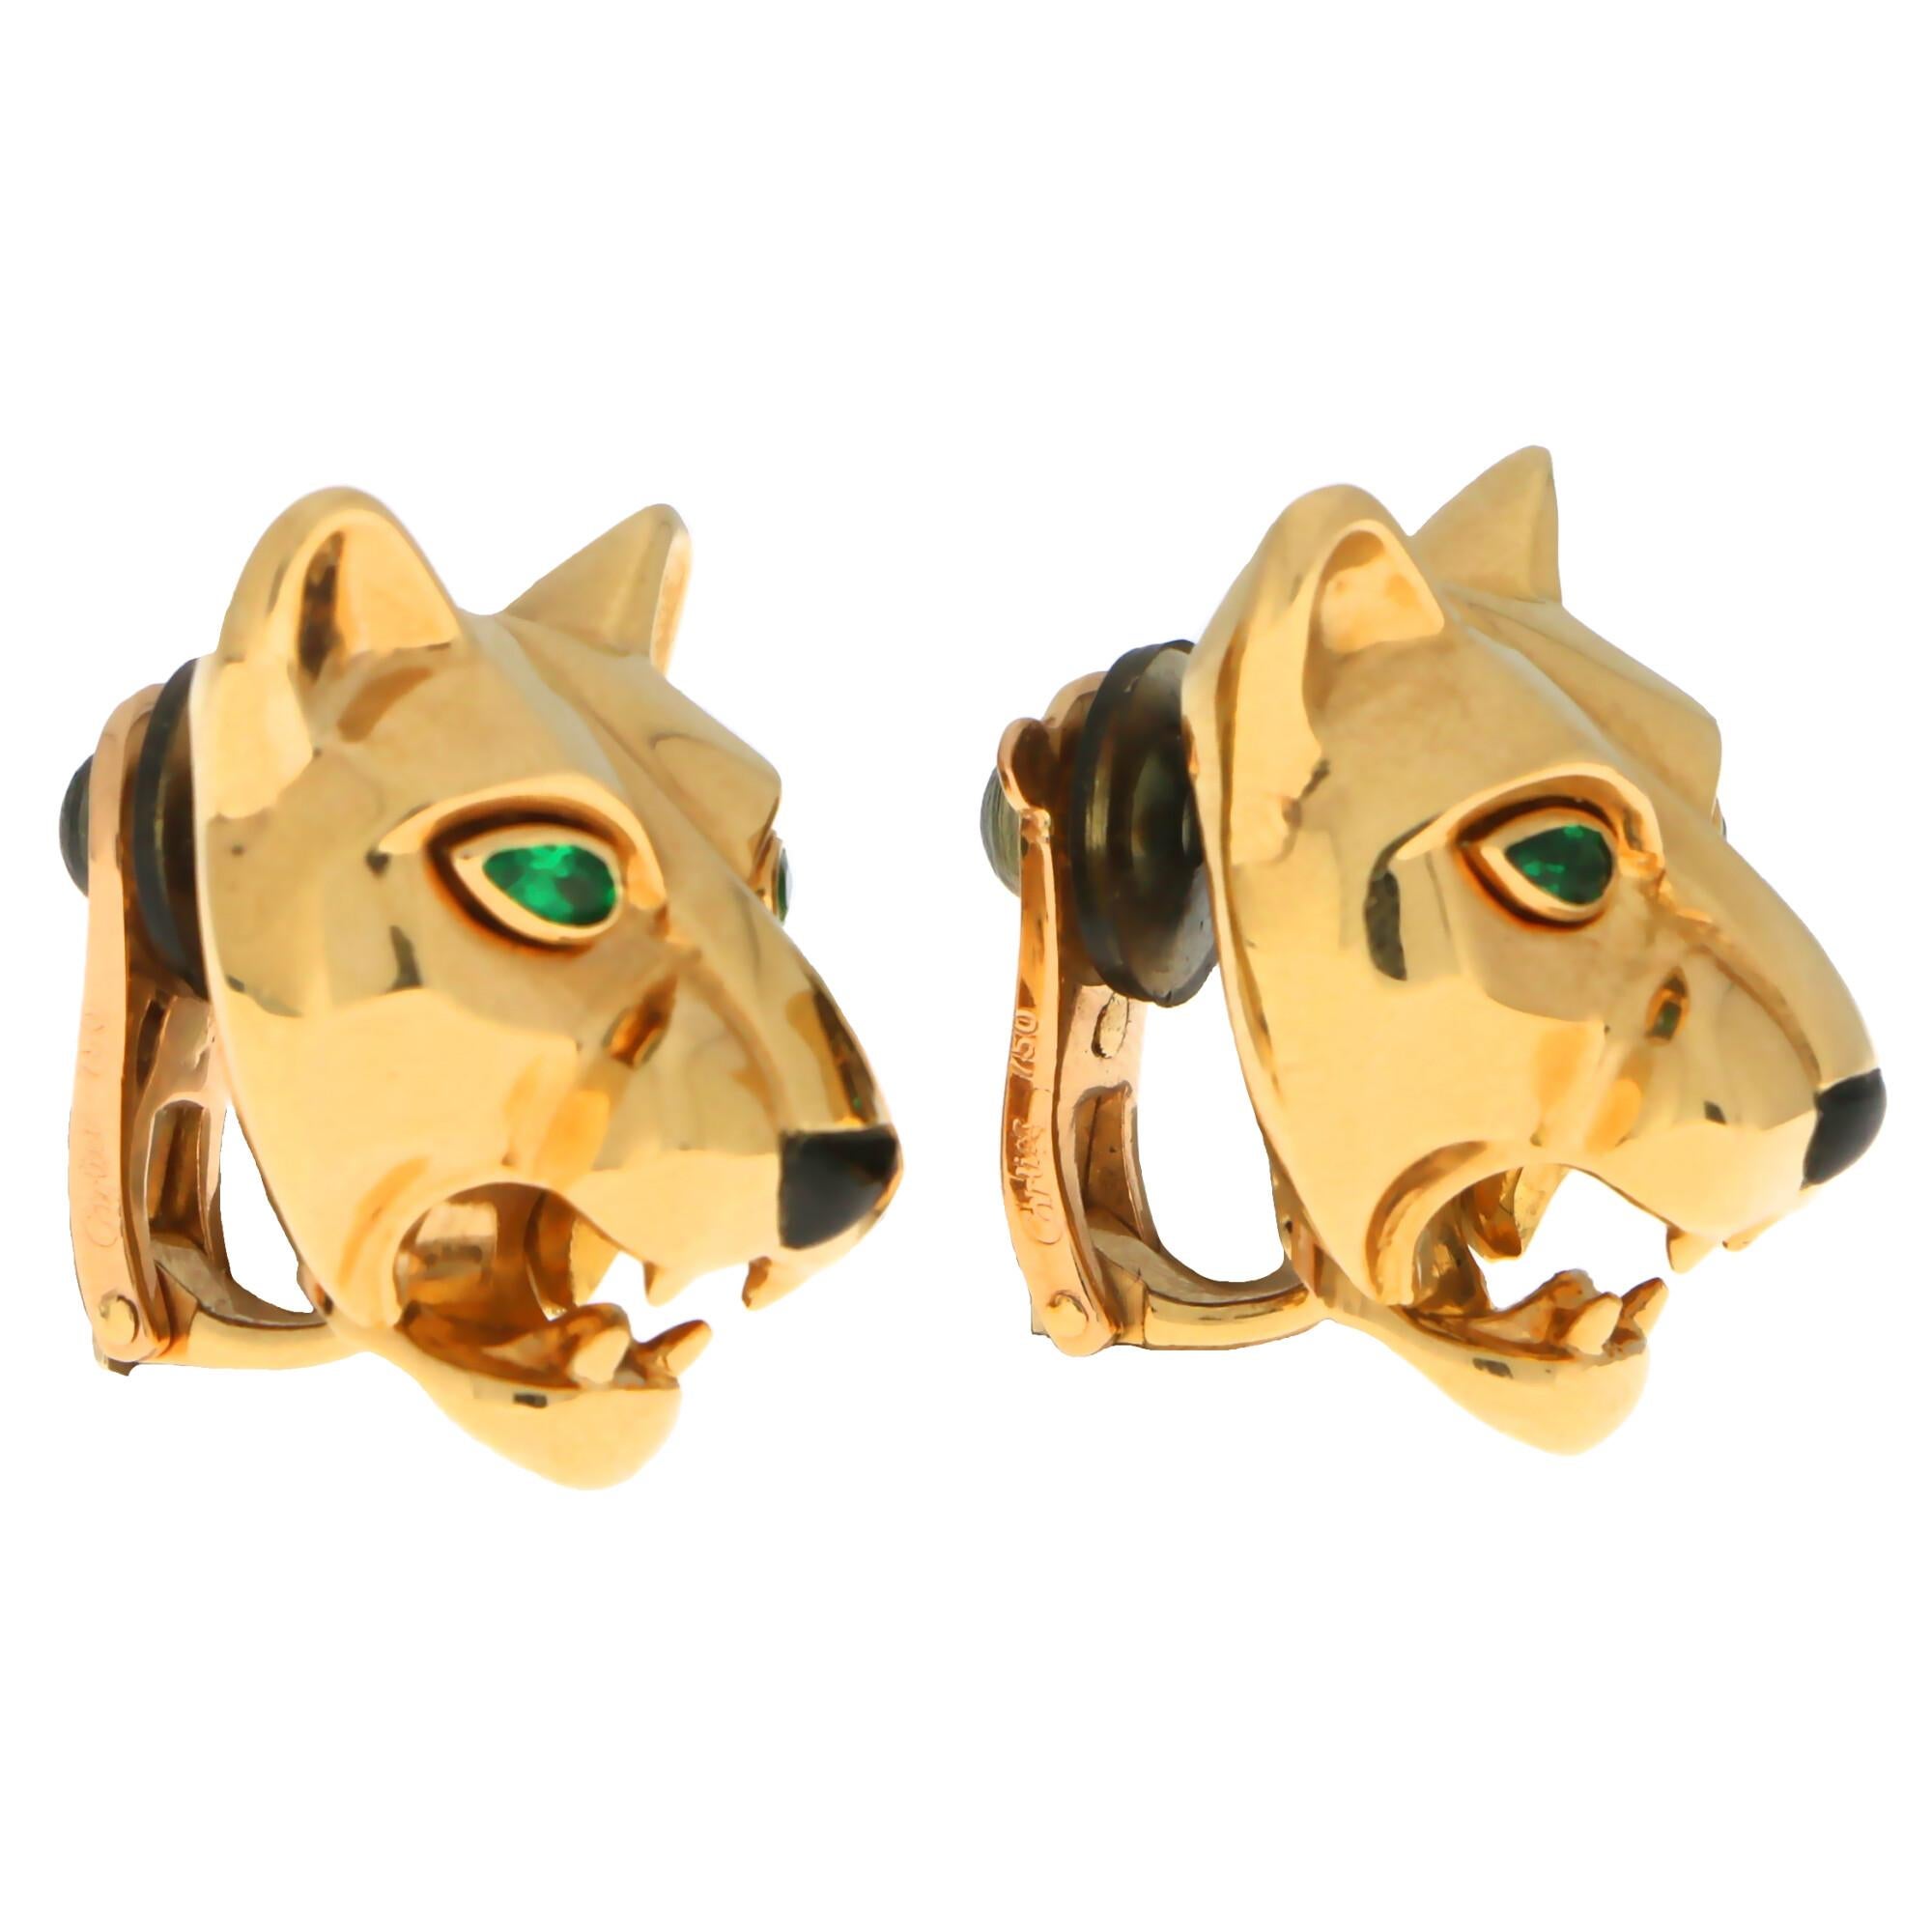 A striking pair of vintage Cartier emerald eyed panther clip on earrings made of 18k yellow gold.

Each earring depicts a beautifully detailed panther face which is set with two pear cut emerald eyes and a cute onyx nose. Unlike the more modern